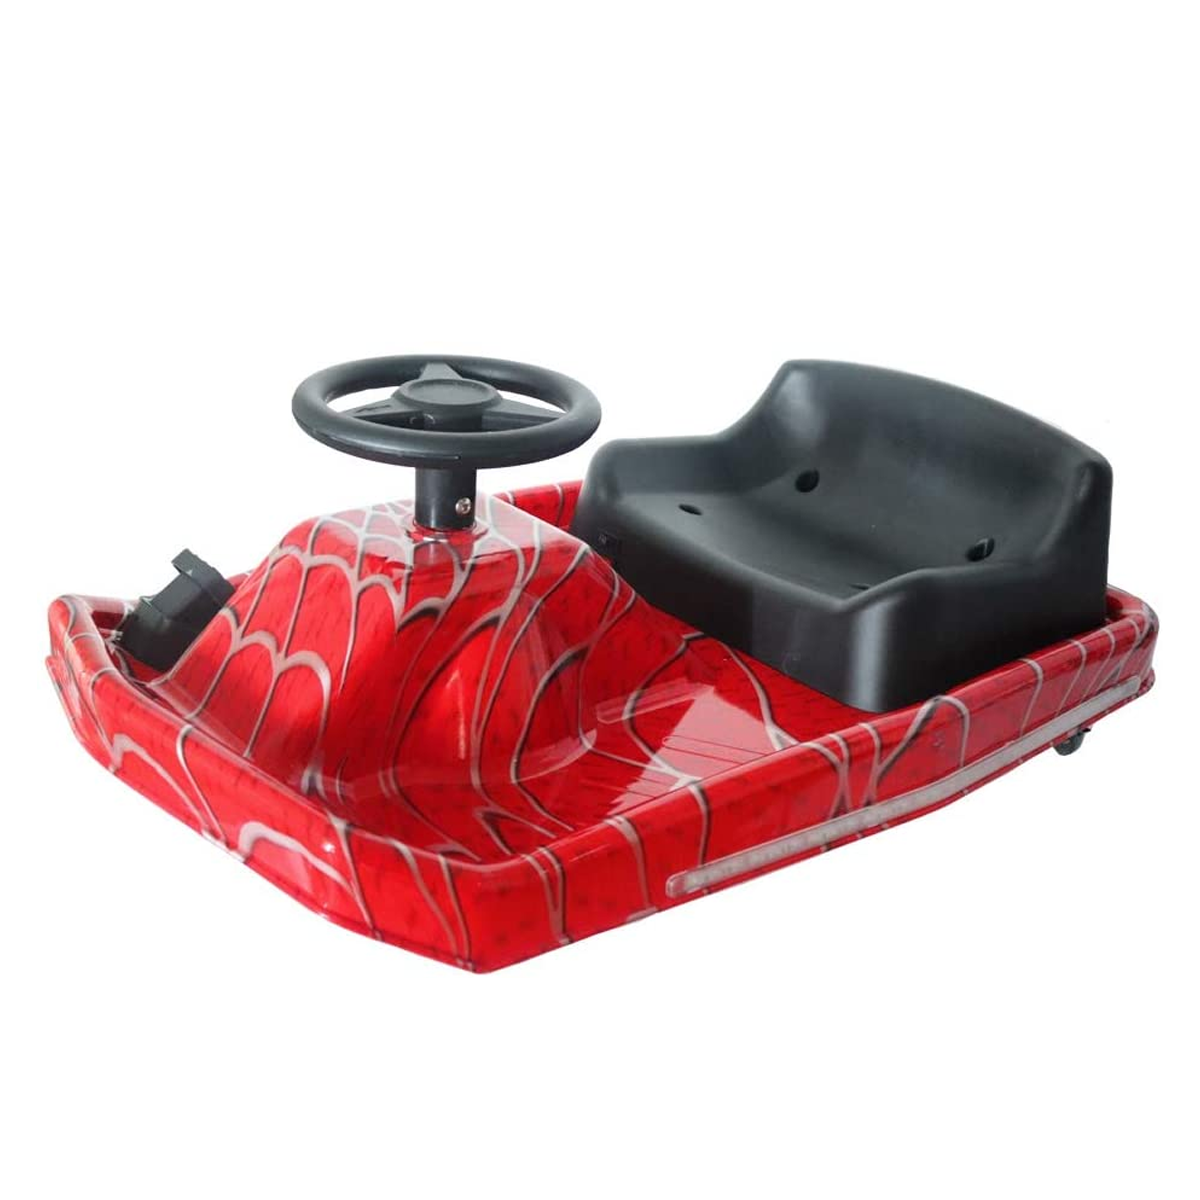 Coolbaby Crazy Cart Electric 360 Spinning Drifting Scooter